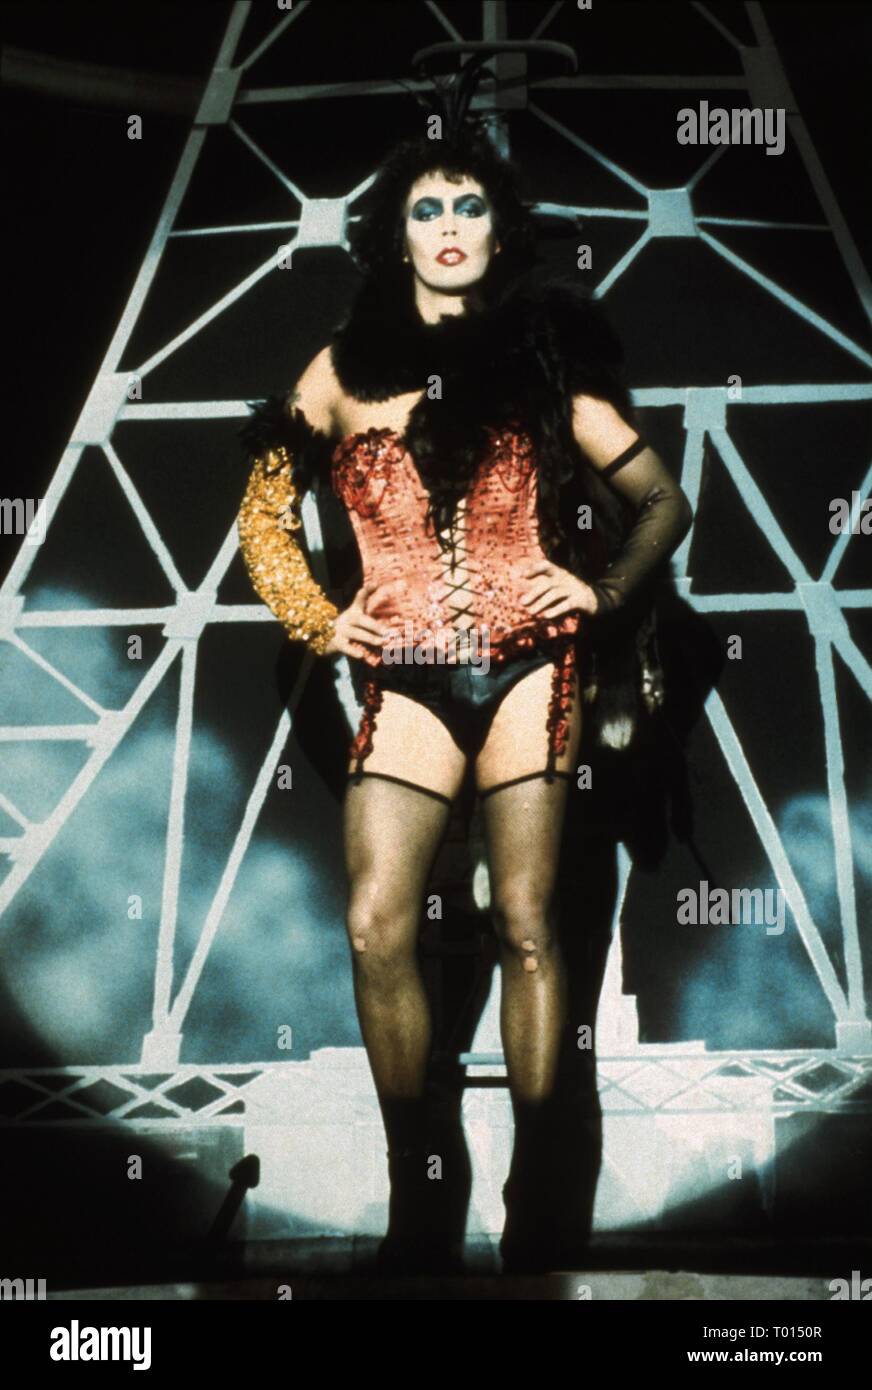 repertoire Lave hver gang TIM CURRY, THE ROCKY HORROR PICTURE SHOW, 1975 Stock Photo - Alamy